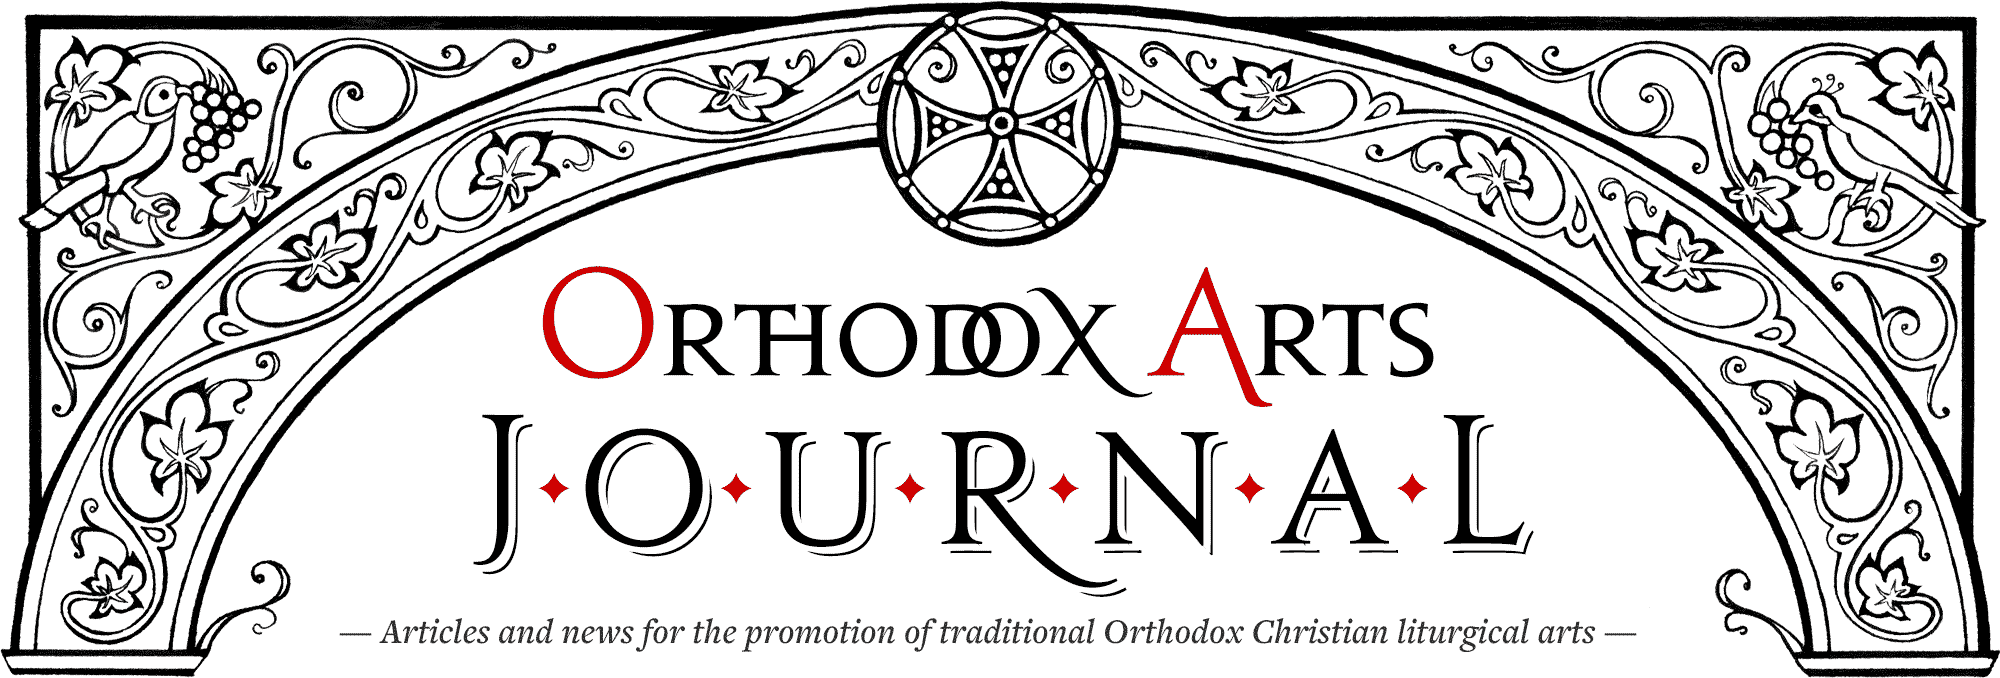 Announcing the orthodox.